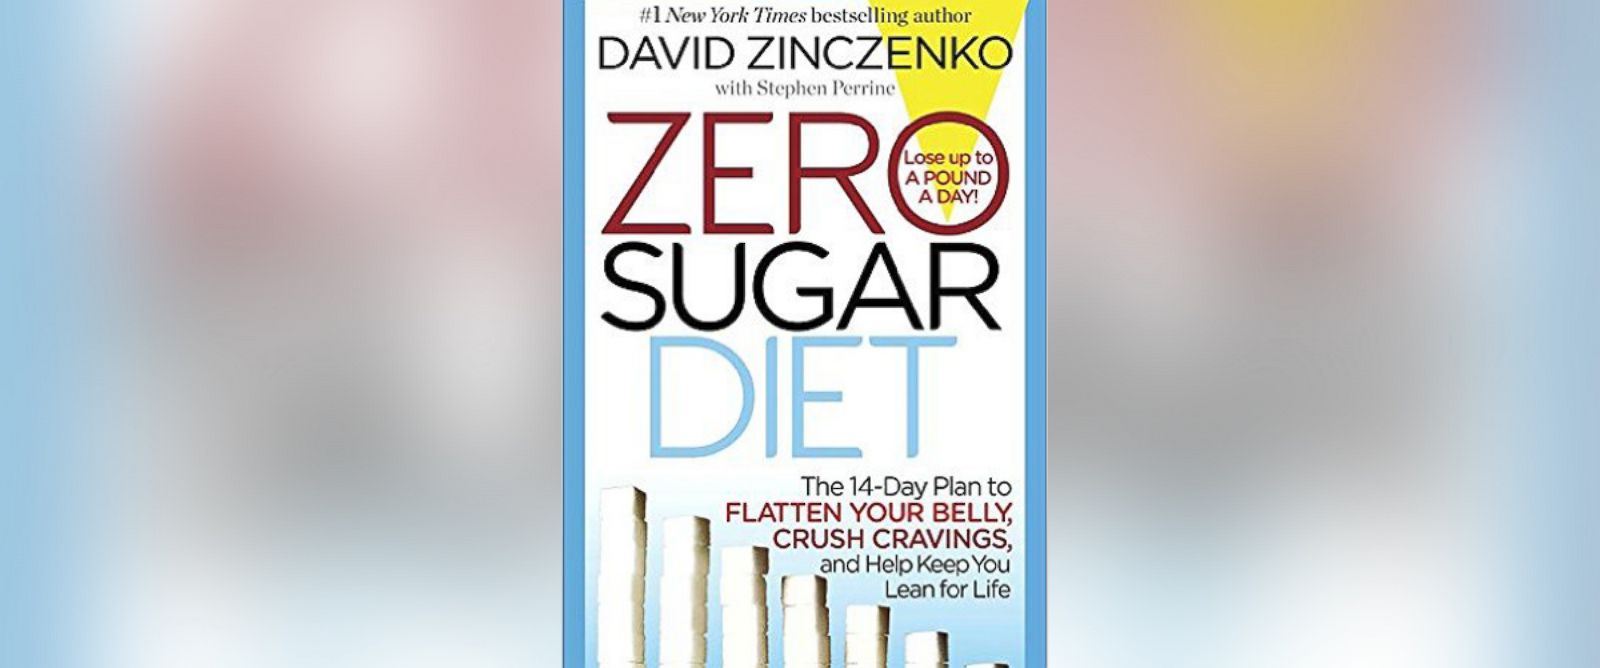 PHOTO: Book cover for "Zero Sugar Diet: The 14-Day Plan to Flatten Your Belly, Crush Cravings, and Help Keep You Lean for Life" by David Zinczenko.